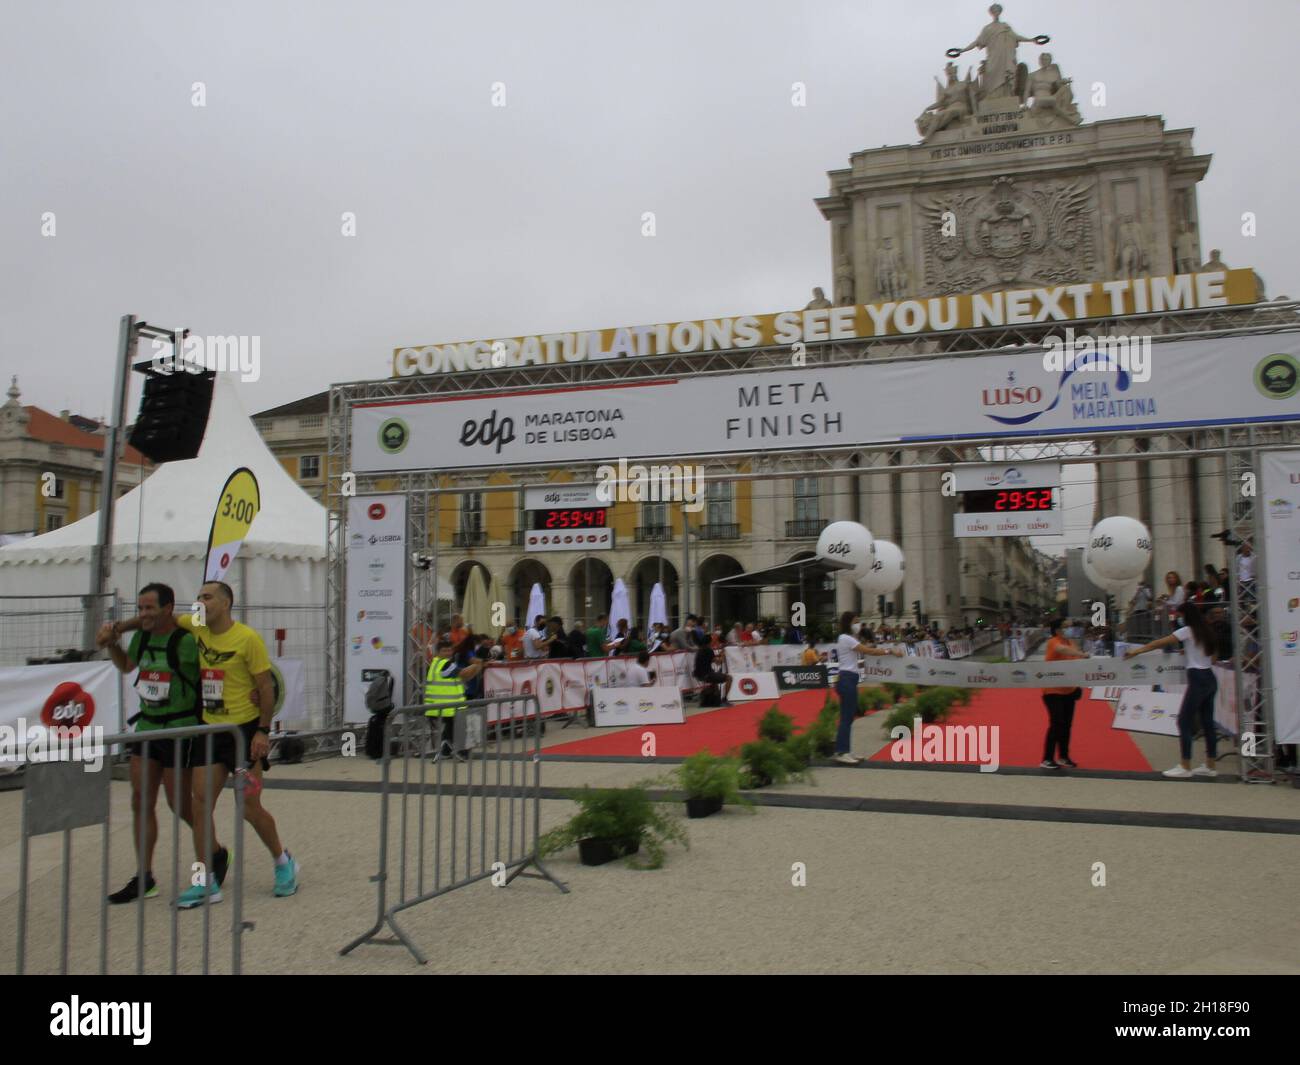 October 17, 2021, Lisboa, Portugal, USA: EDP Lisbon Marathon. October 17, 2021, Lisbon, Portugal: Ethiopian Andualem Shiferaw won the EDP Lisbon marathon on Sunday (27), repeating the triumph achieved in 2019 and once again breaking the race record, now with time and 2:05.52 hours. In a race that did not take place in 2020 due to the covid-19 pandemic, Shiferaw once again won the Lisbon race, having covered 42.195 kilometers below the 2:06.00 hours established two years ago, when he also broke the record. Kenyan Hosea Kiplimo finished second with 2:07.39 hours, while Ethiopian Adane Amsalu was Stock Photo